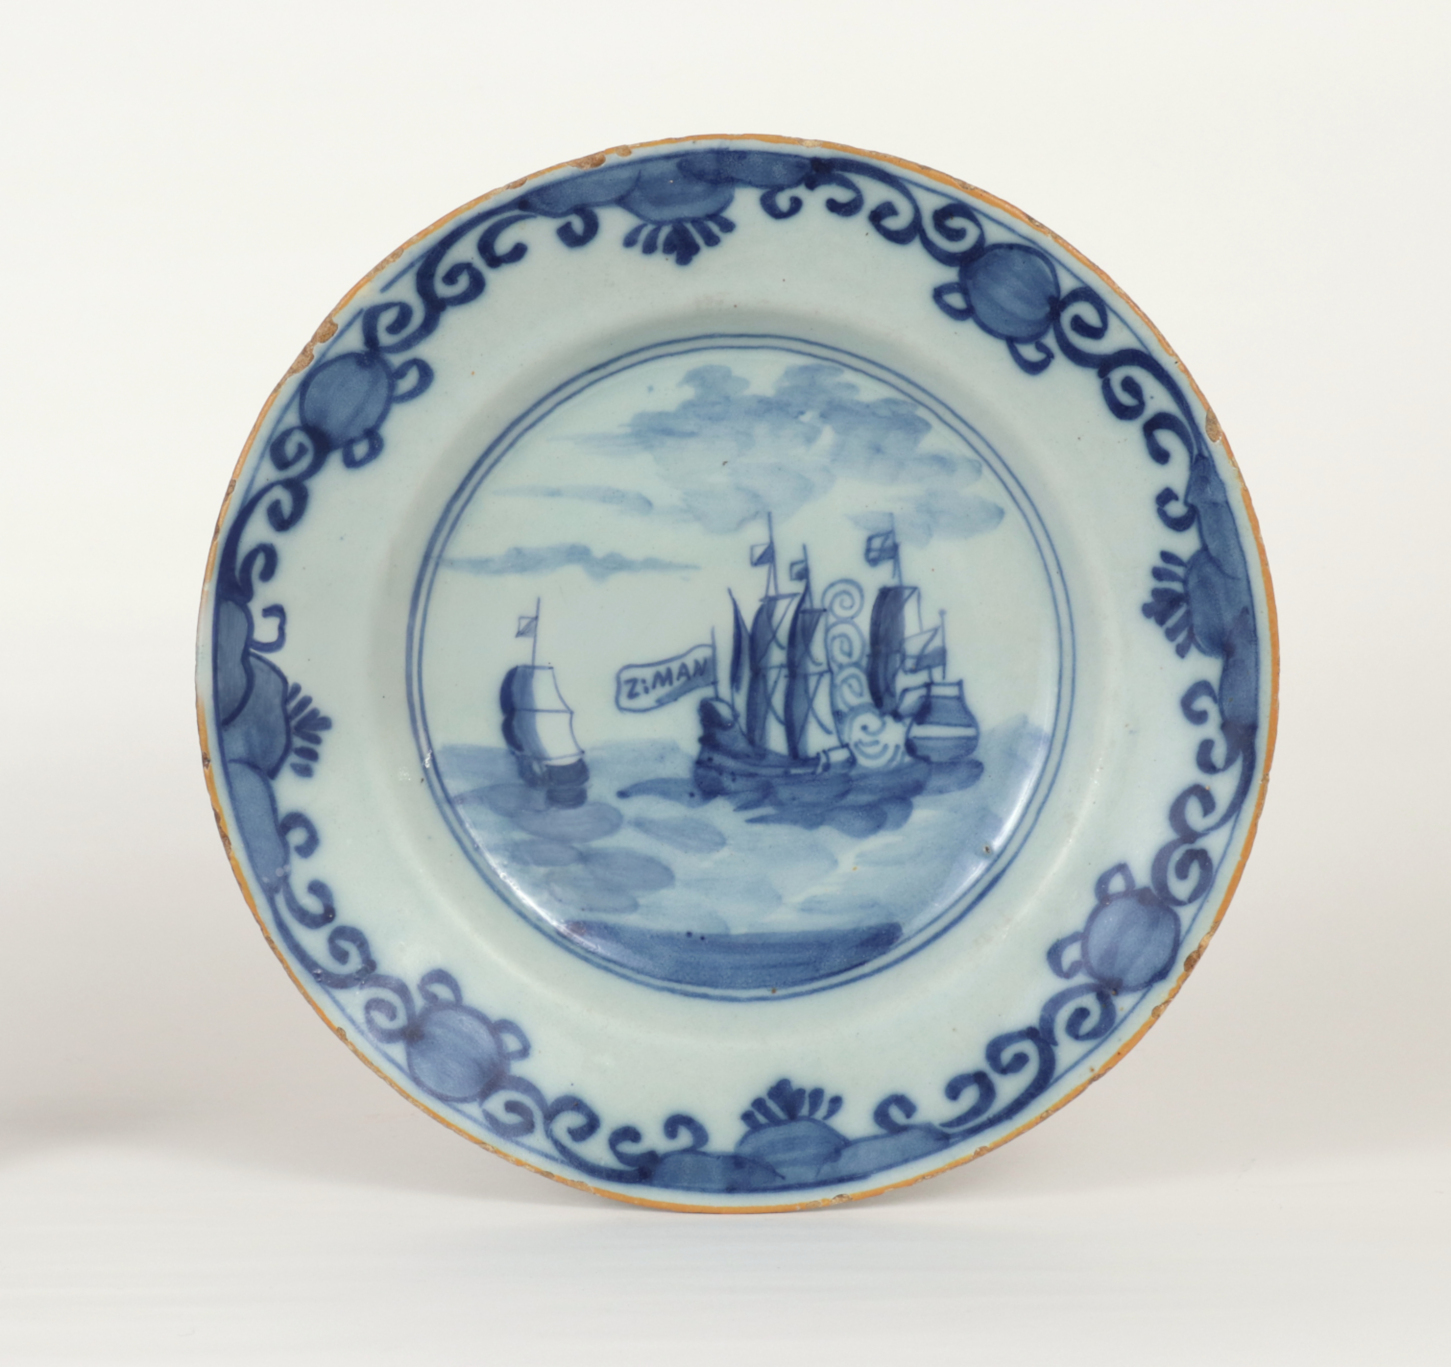 Delft Plate Commerating the Battle of Dogger Bank, c. 1781